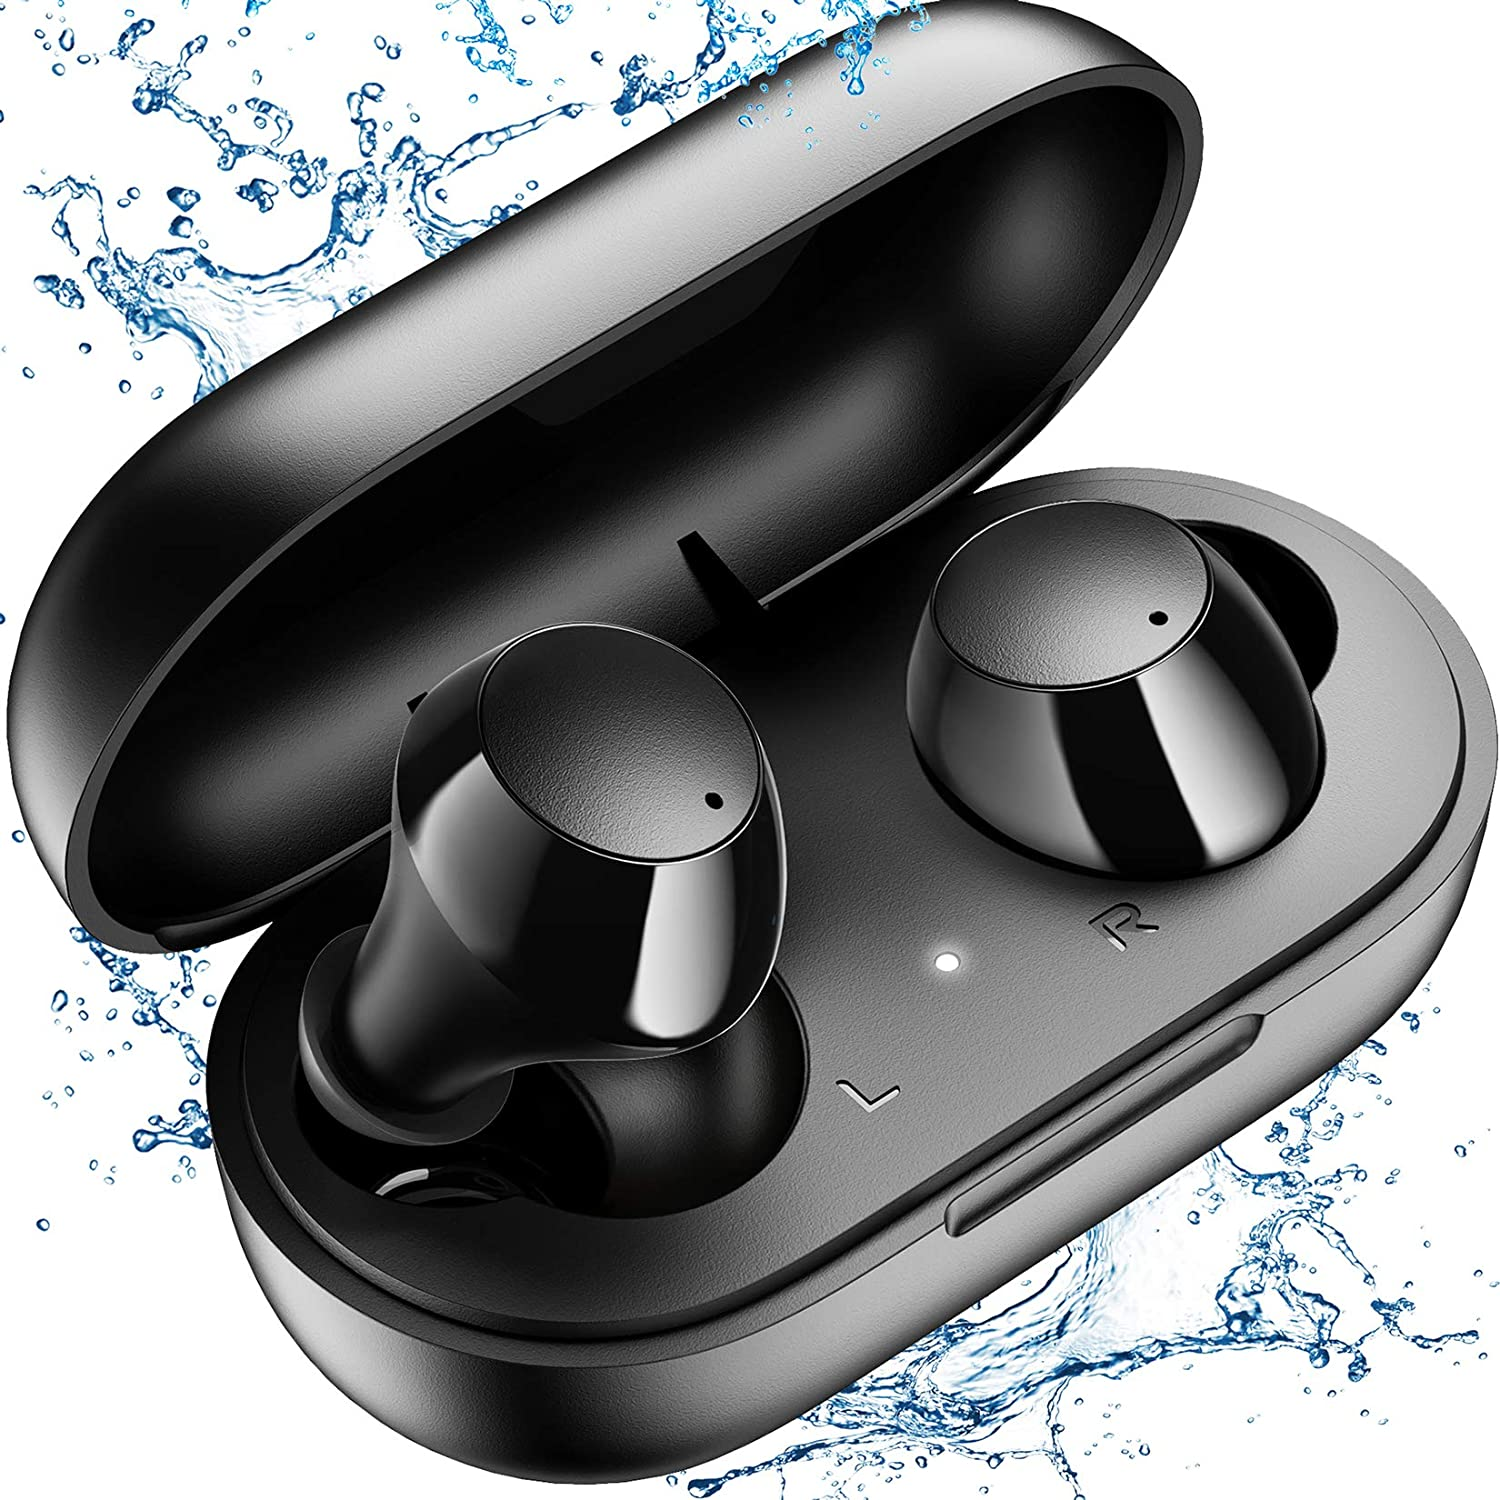 Amazon.com: Waterproof Wireless Earbuds,Kurdene Bluetooth Earbuds with Wireless Charging case,Touch Control $17.99